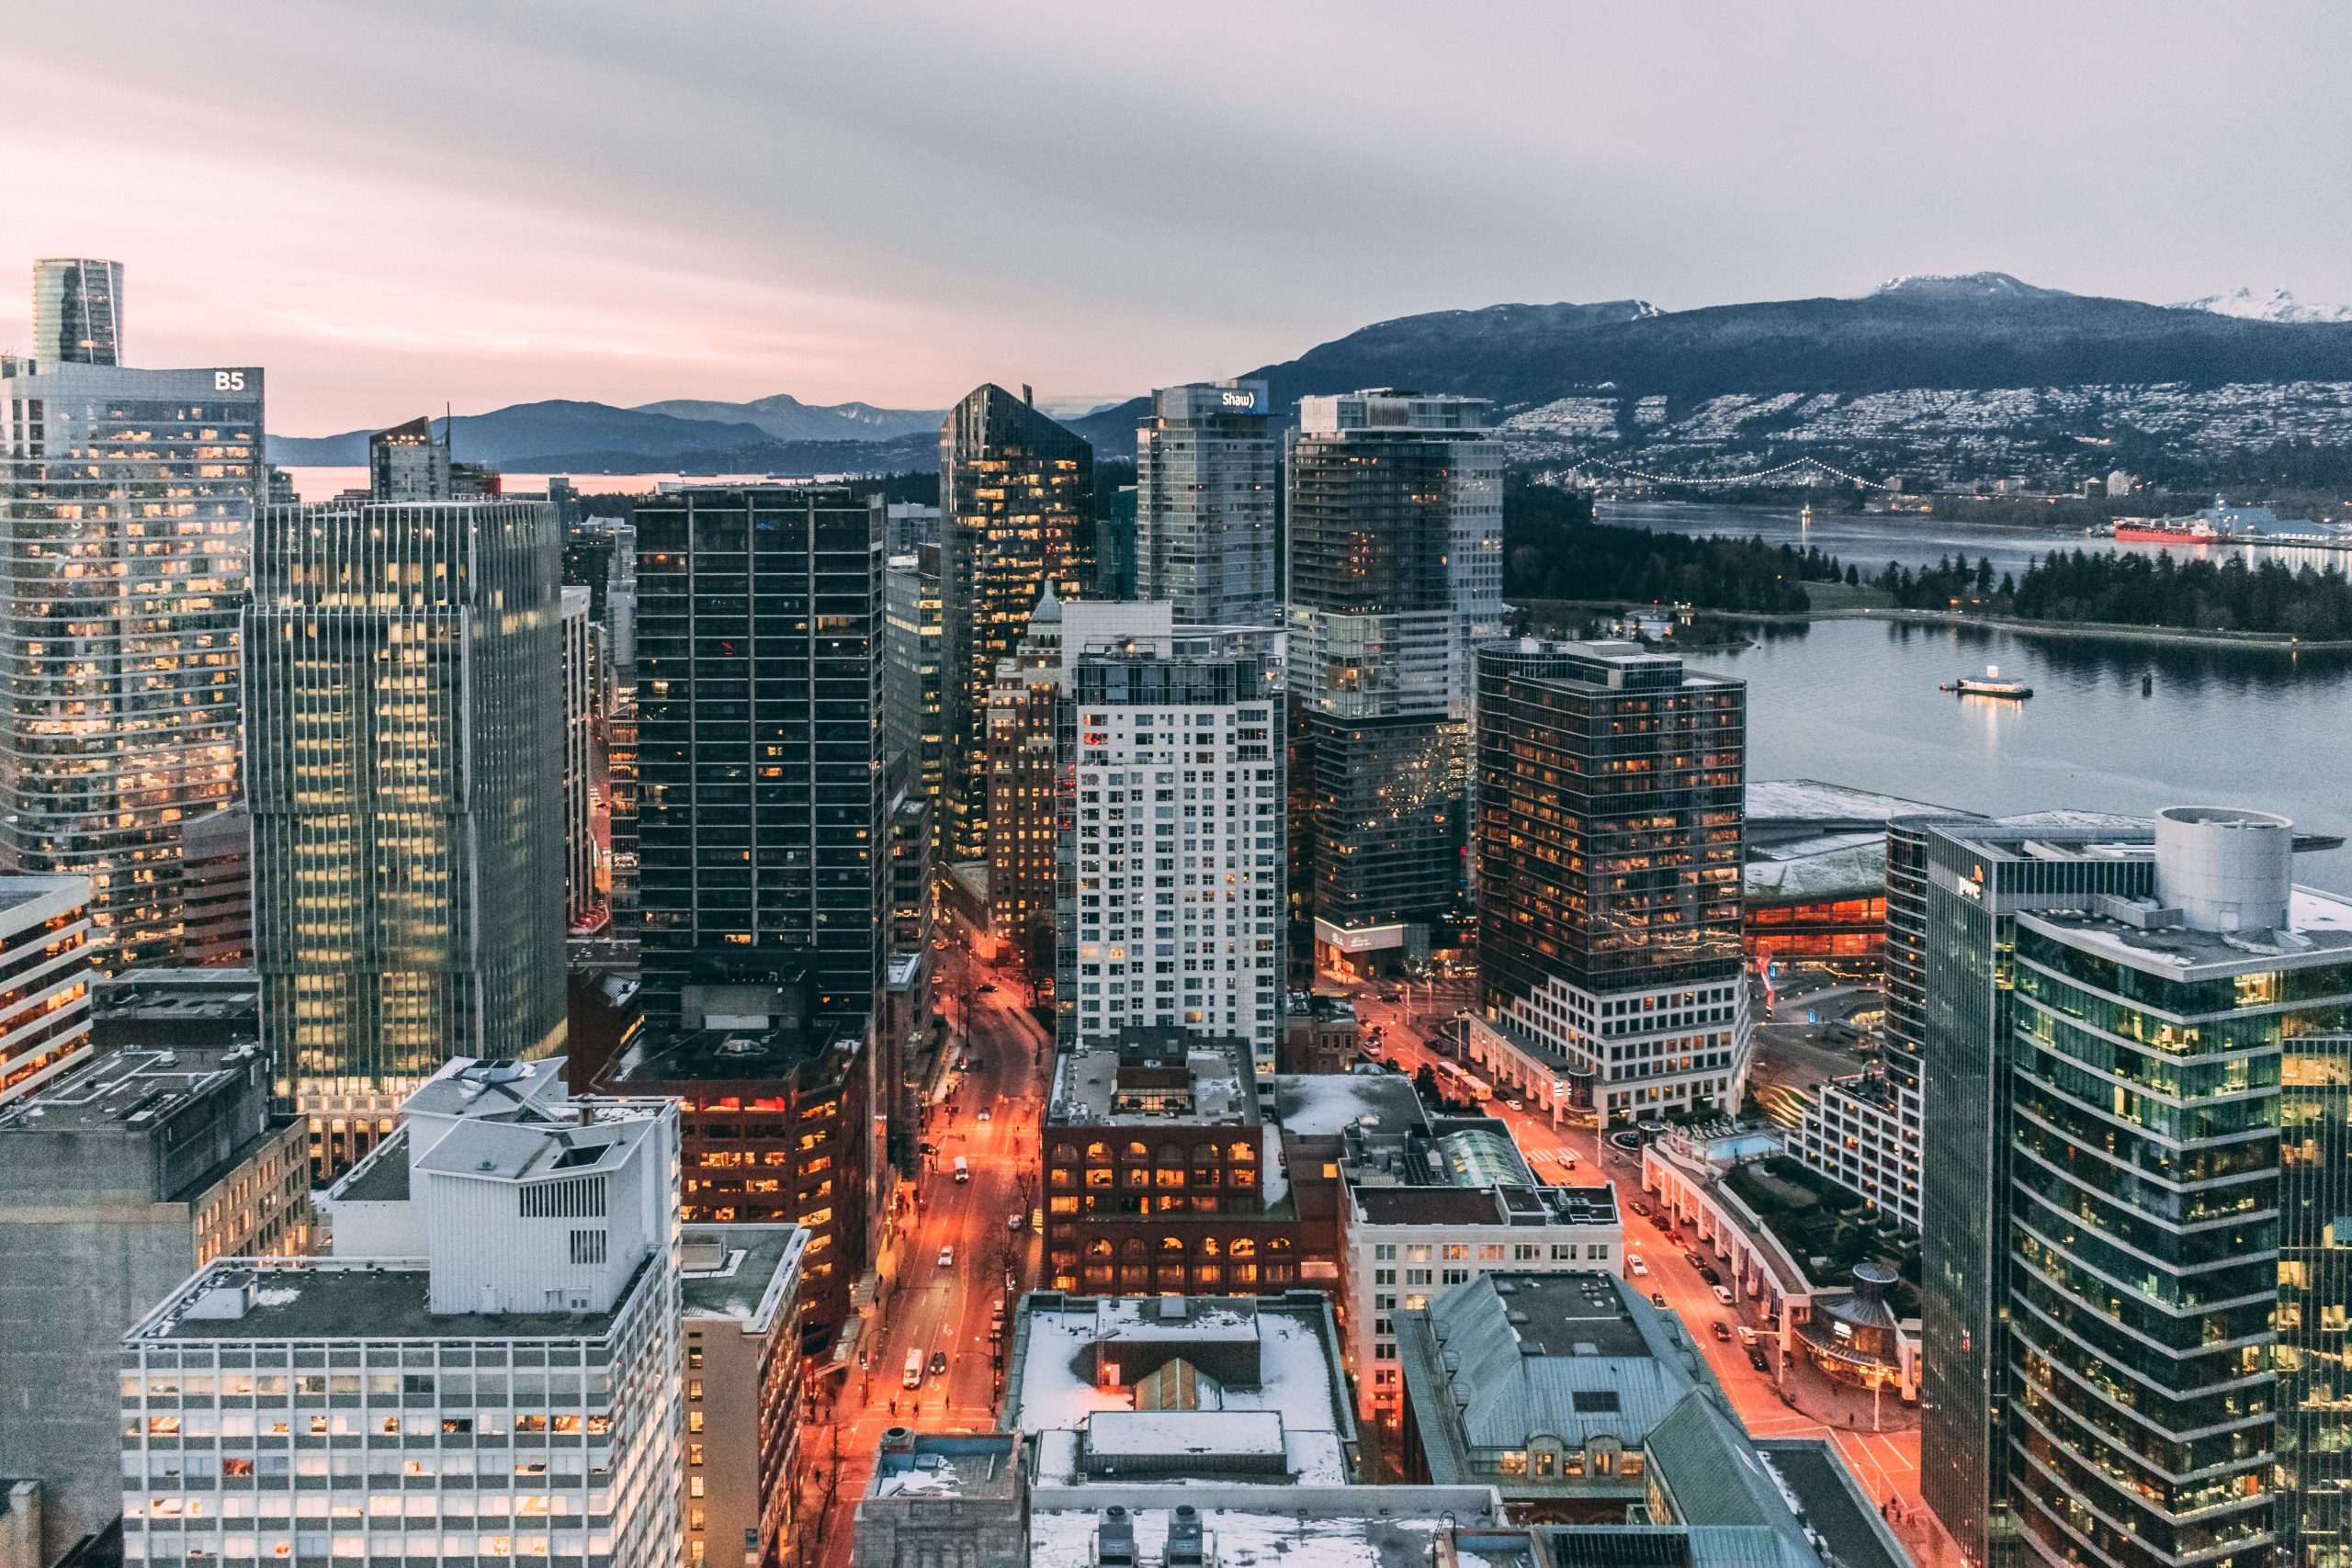 DOWNTOWN VAN: A LIVING WAGE EMPLOYER